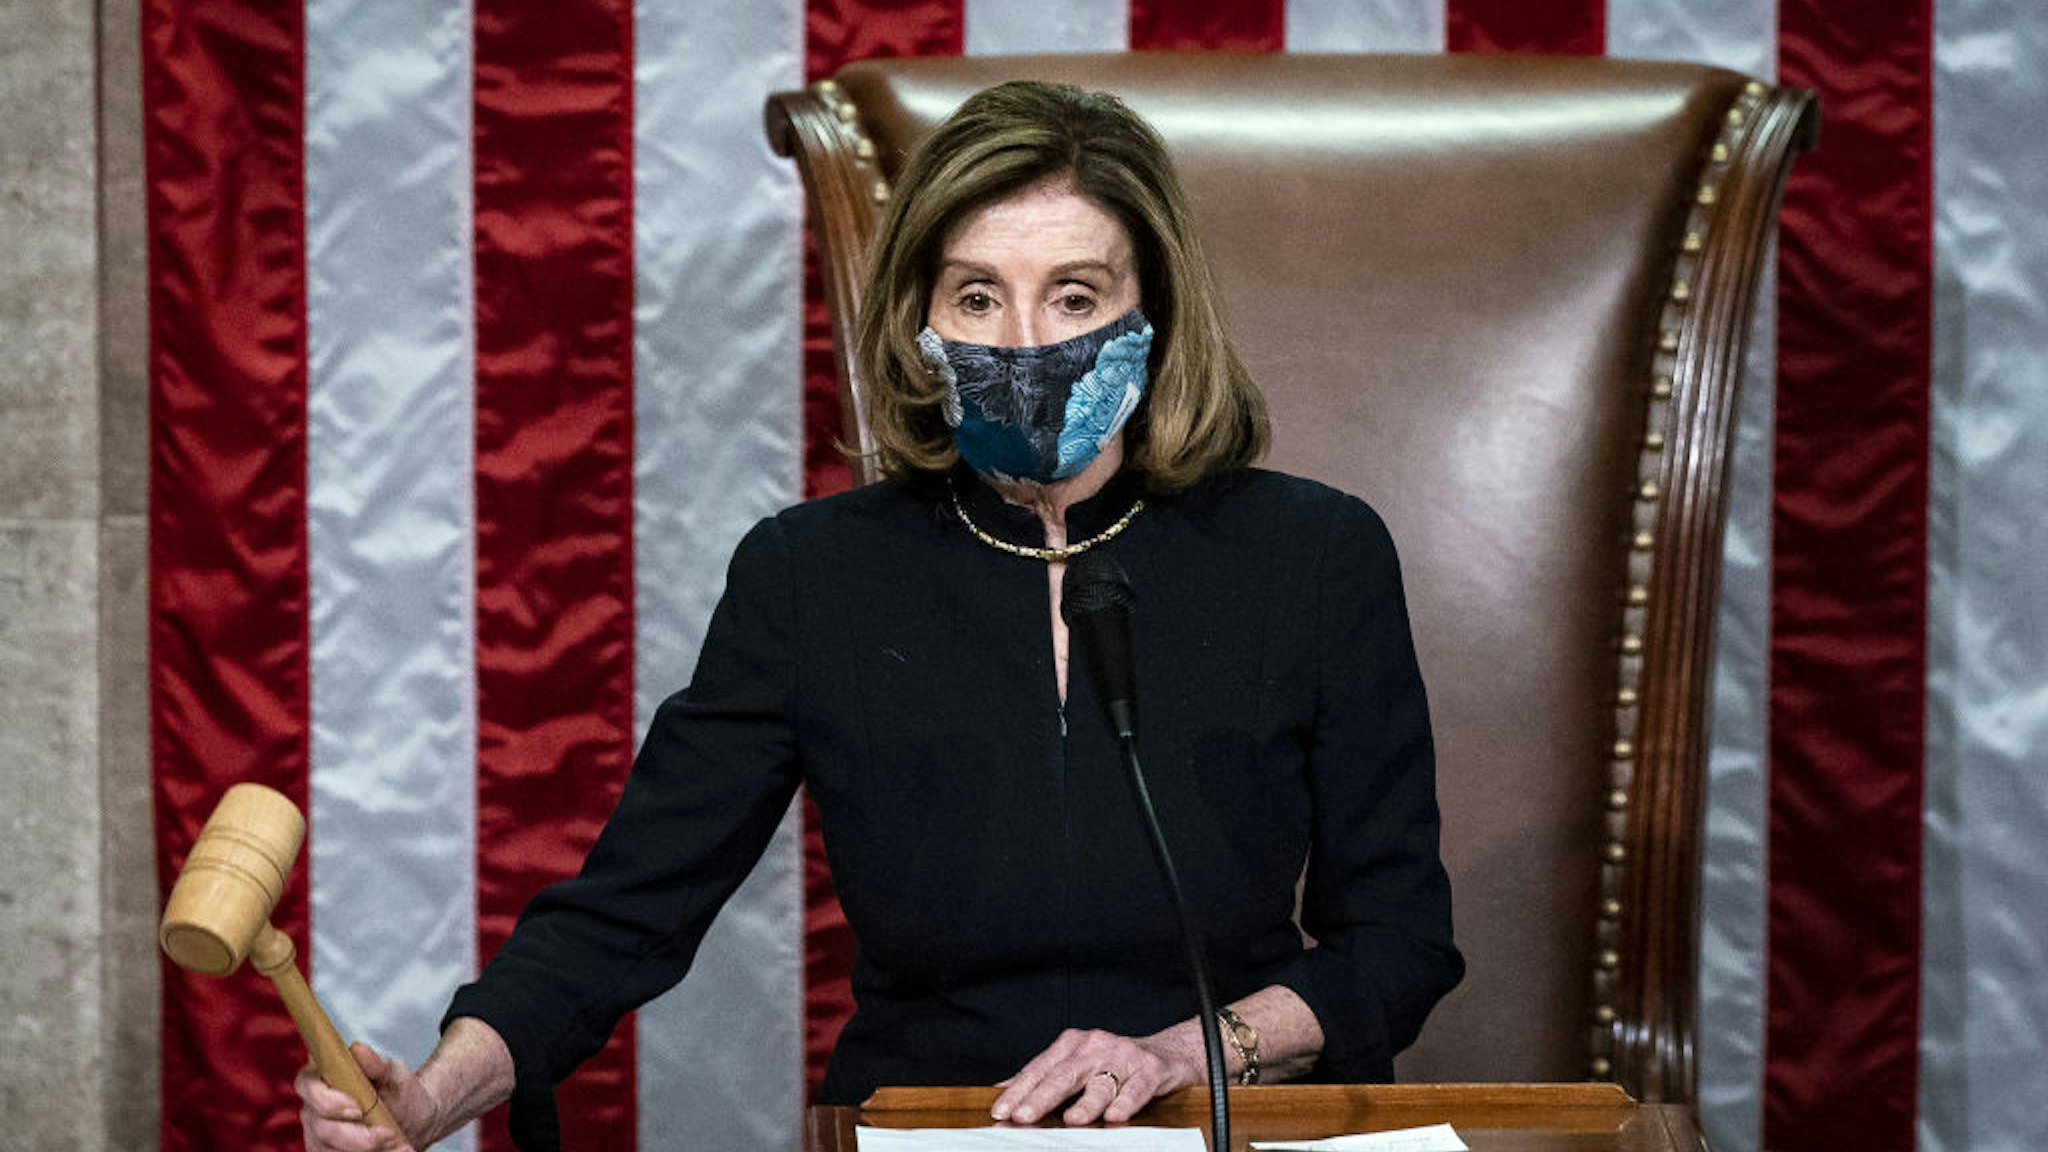 U.S. House Speaker Nancy Pelosi, a Democrat from California, wears a protective mask while banging the Speaker's gavel on the floor of the House at the U.S. Capitol in Washington, D.C., U.S., on Wednesday, Jan. 13, 2021. President Donald Trump was impeached by the U.S. House on a single charge of incitement of insurrection for his role in a deadly riot by his supporters that left five dead and the Capitol ransacked, putting an indelible stain on his legacy with only a week left in his term. Photographer: Al Drago/Bloomberg via Getty Images